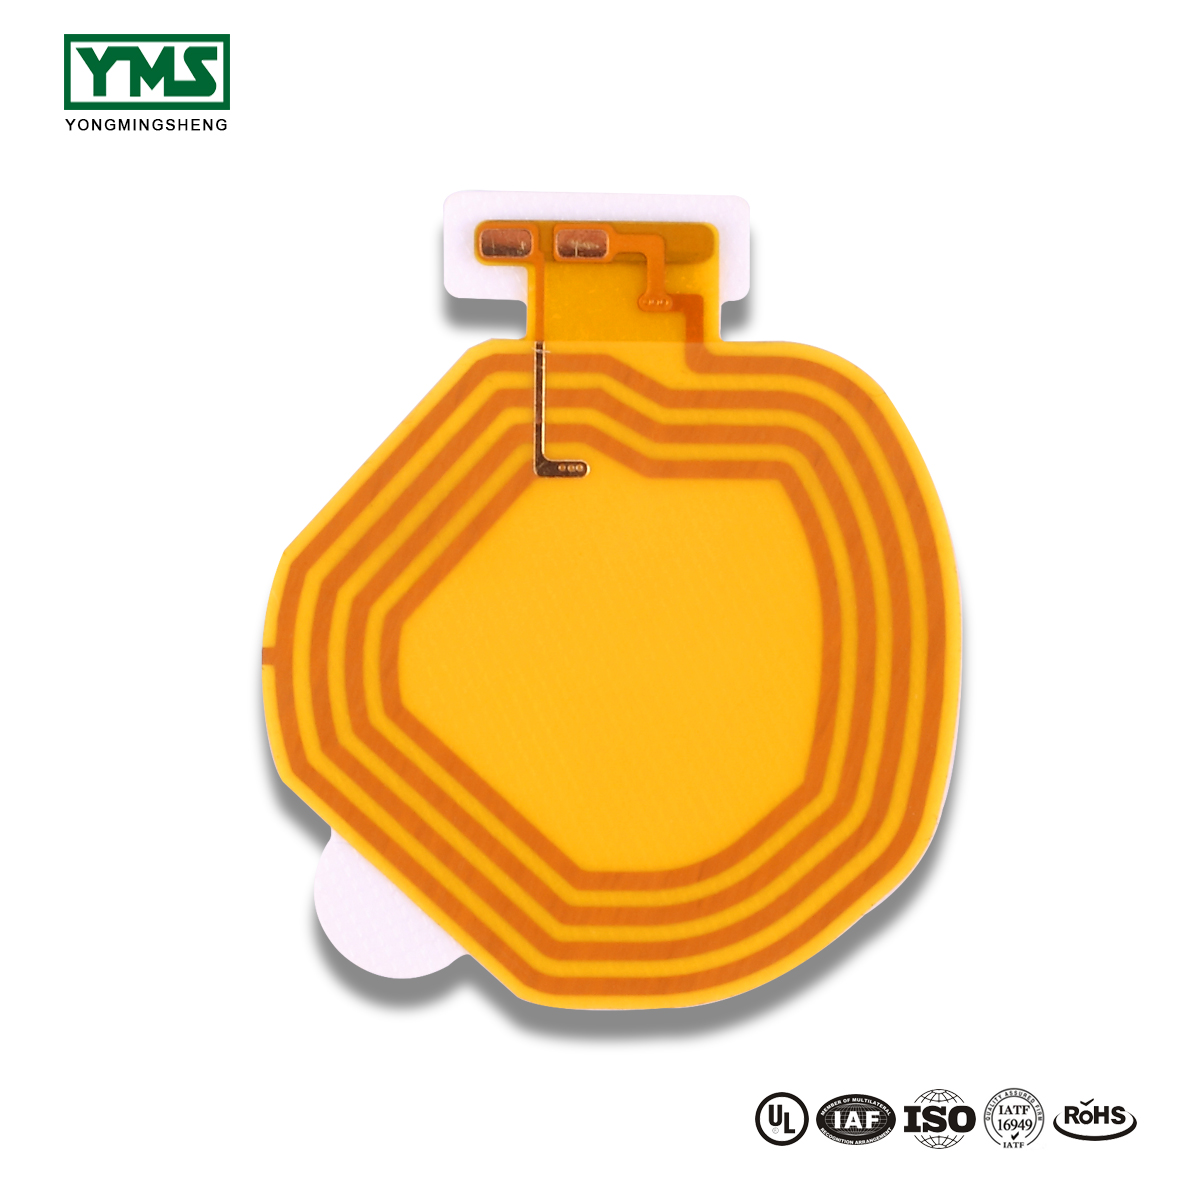 Europe style for Ceramic Cooling & Heating Series Pcb - 1Layer Flexible Board | YMSPCB – Yongmingsheng